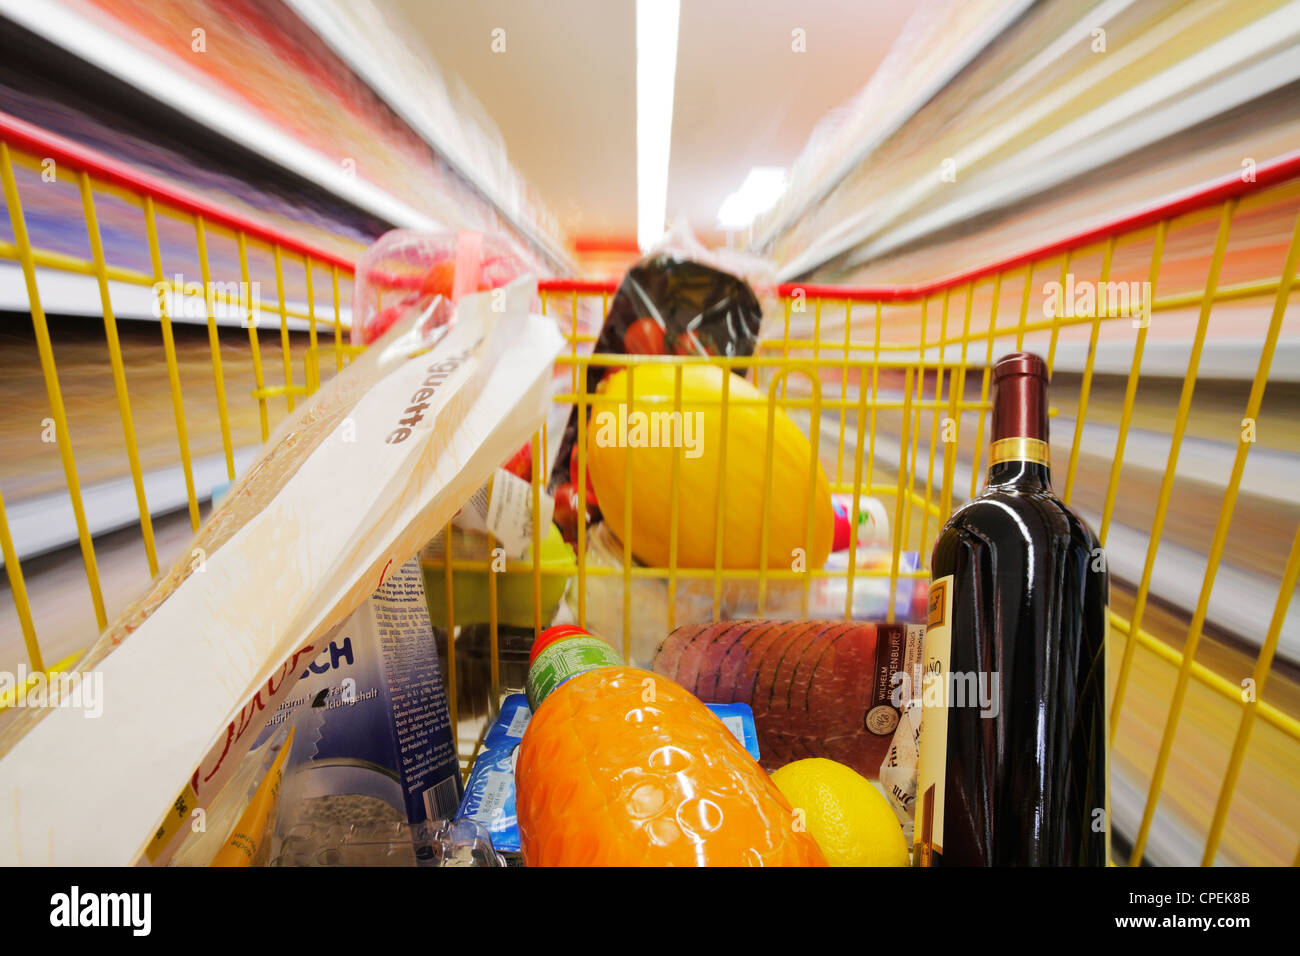 shopping cart in motion between blurred shelves in a supermarket Stock Photo